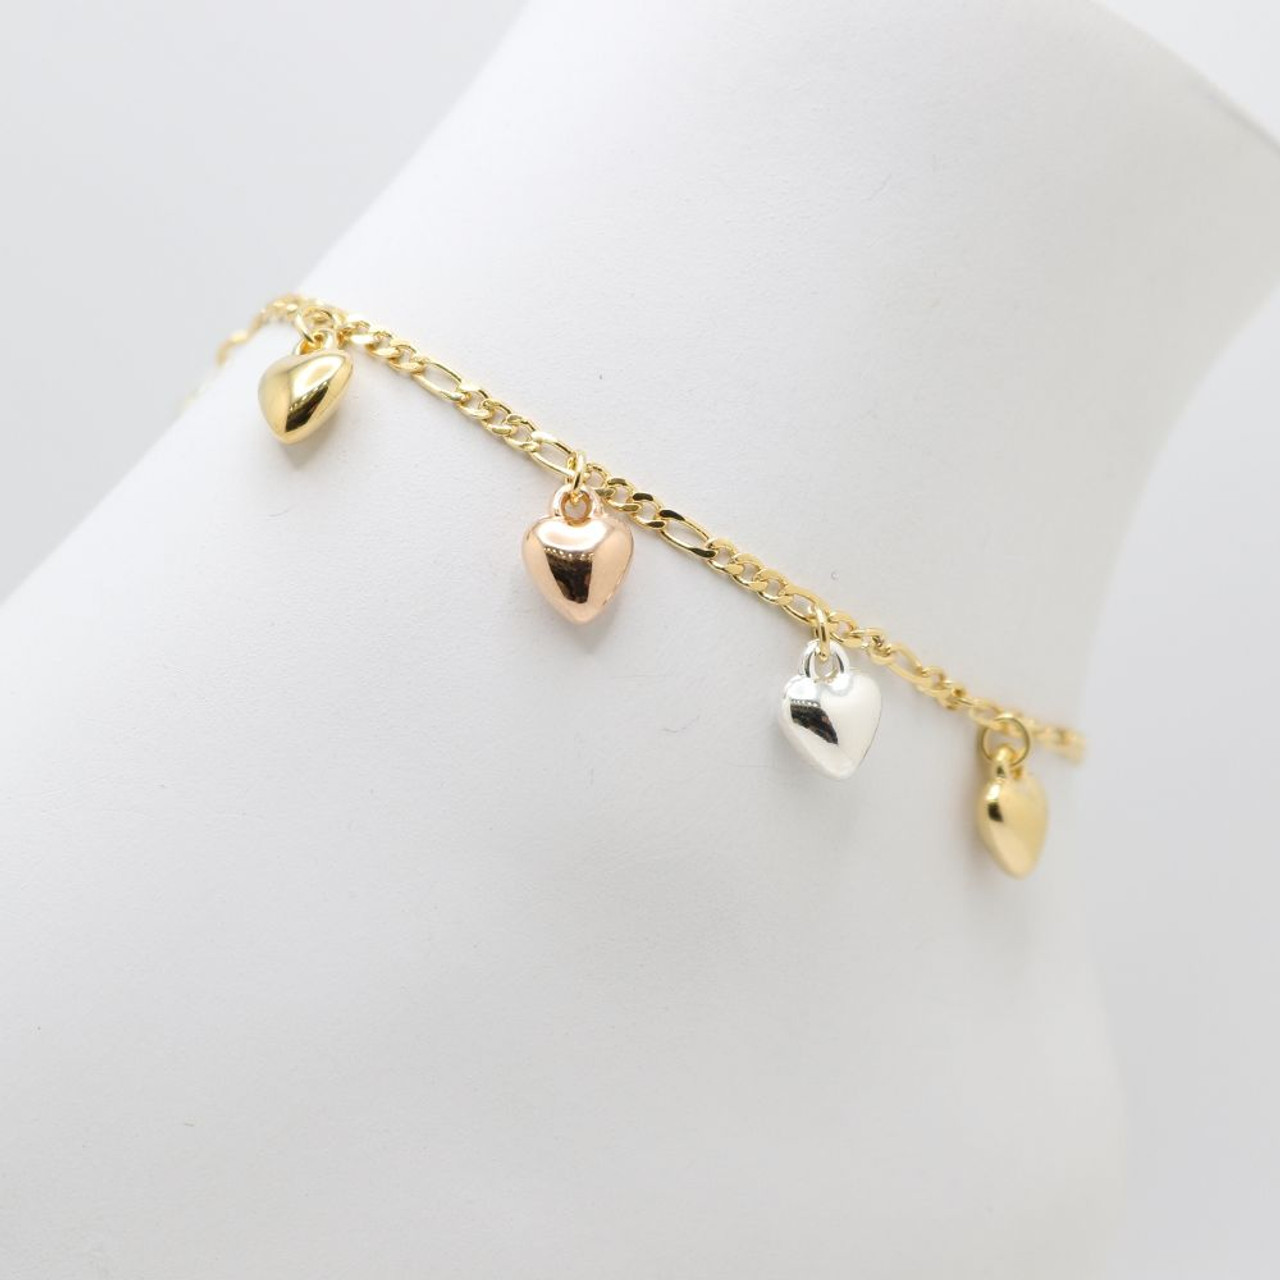 LV Clover Necklace, Bracelet and Anklet – From Fahm